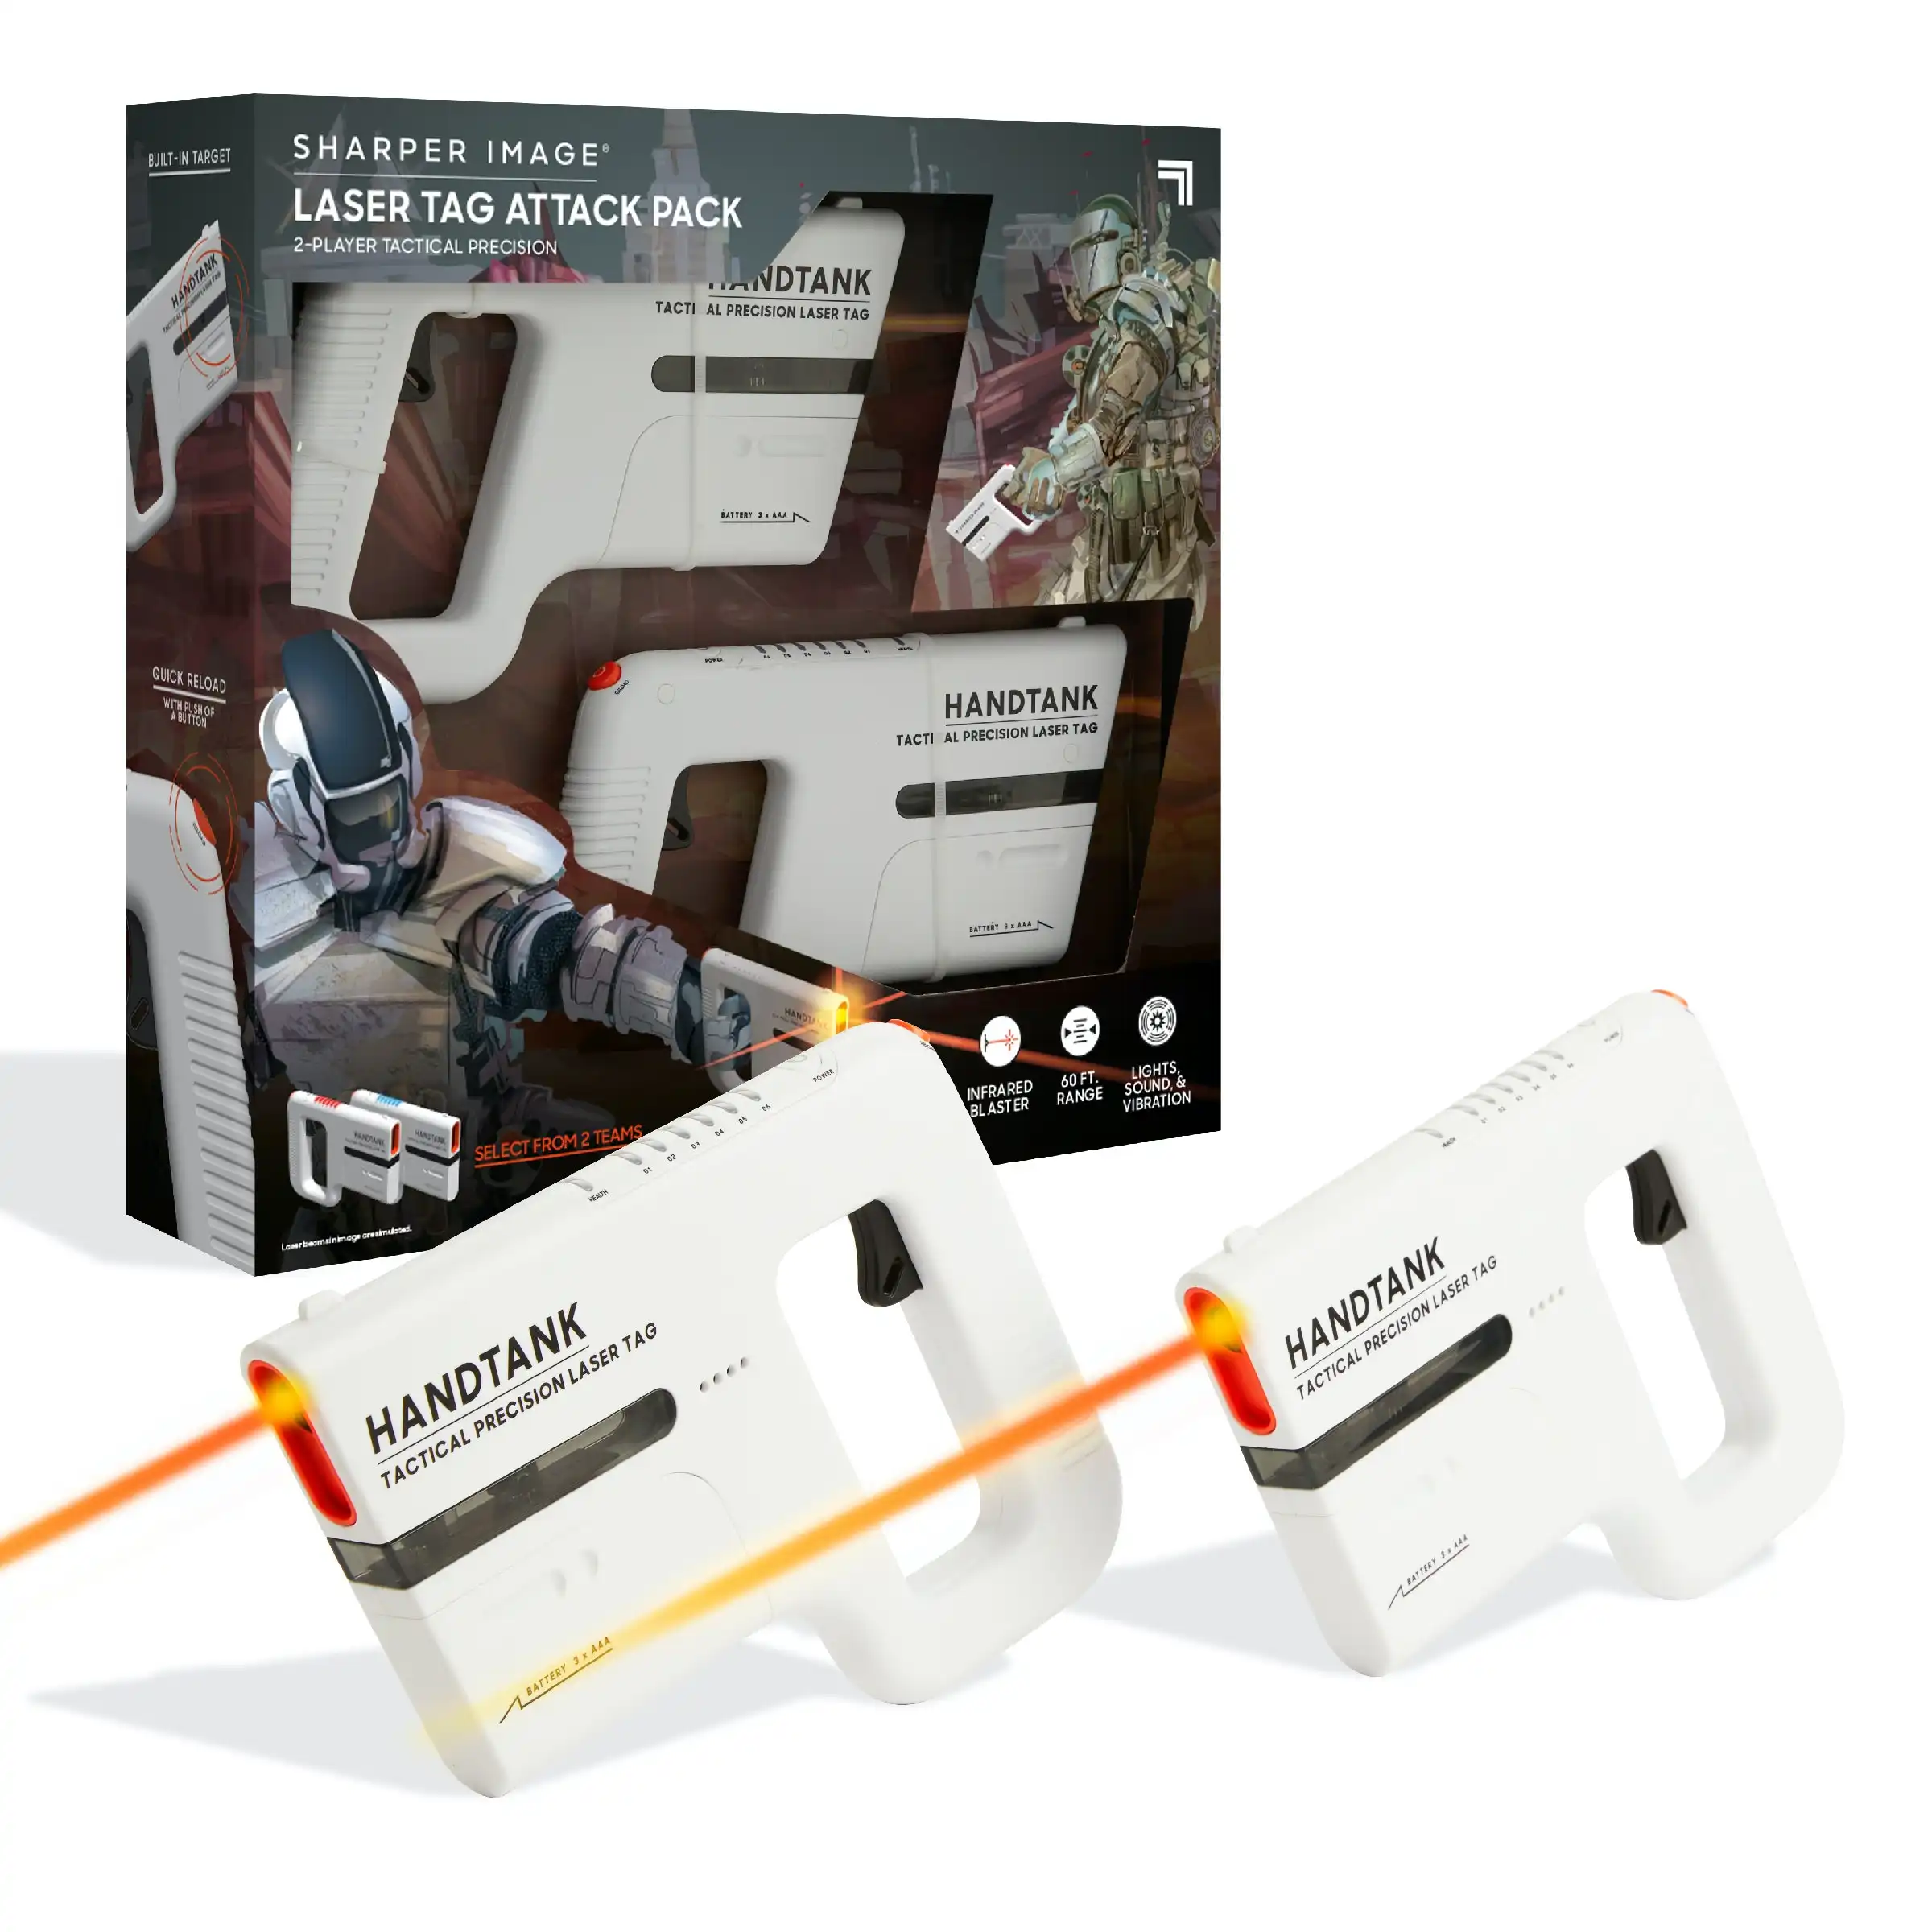 Sharper Image Laser Tag Attack Pack 2-Player Tactical Precision, 2pcs - White